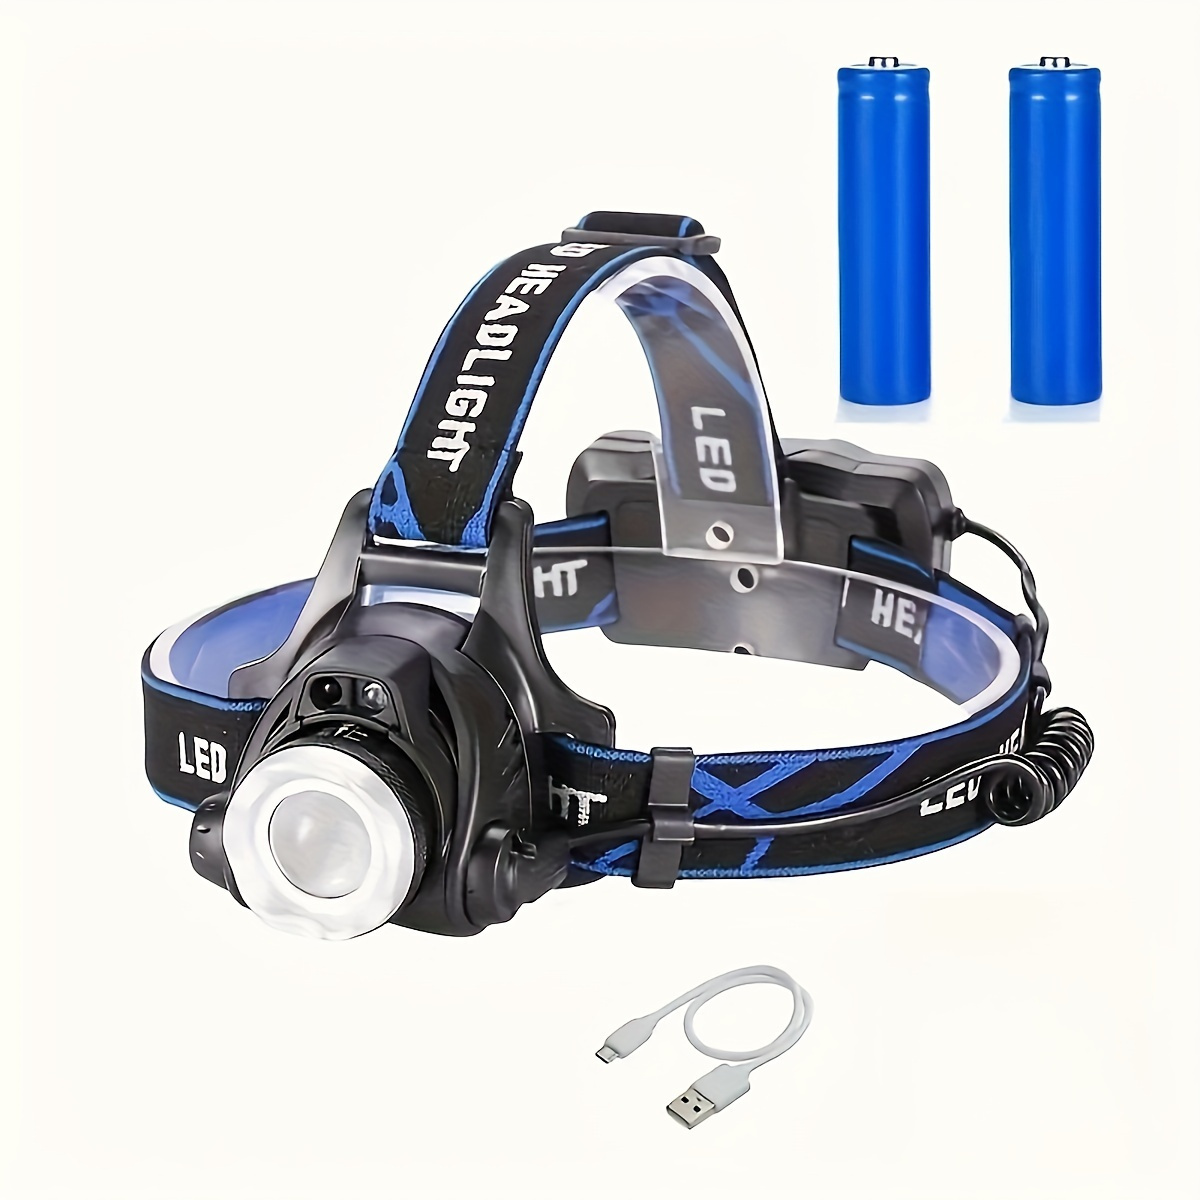 

1pc Rechargeable Headlight, Brightness Zoom Led Headlight, Motion Sensor, Headband Light With 3 Modes And Adjustable Headband, Ideal For Outdoor Camping, Running, Climbing